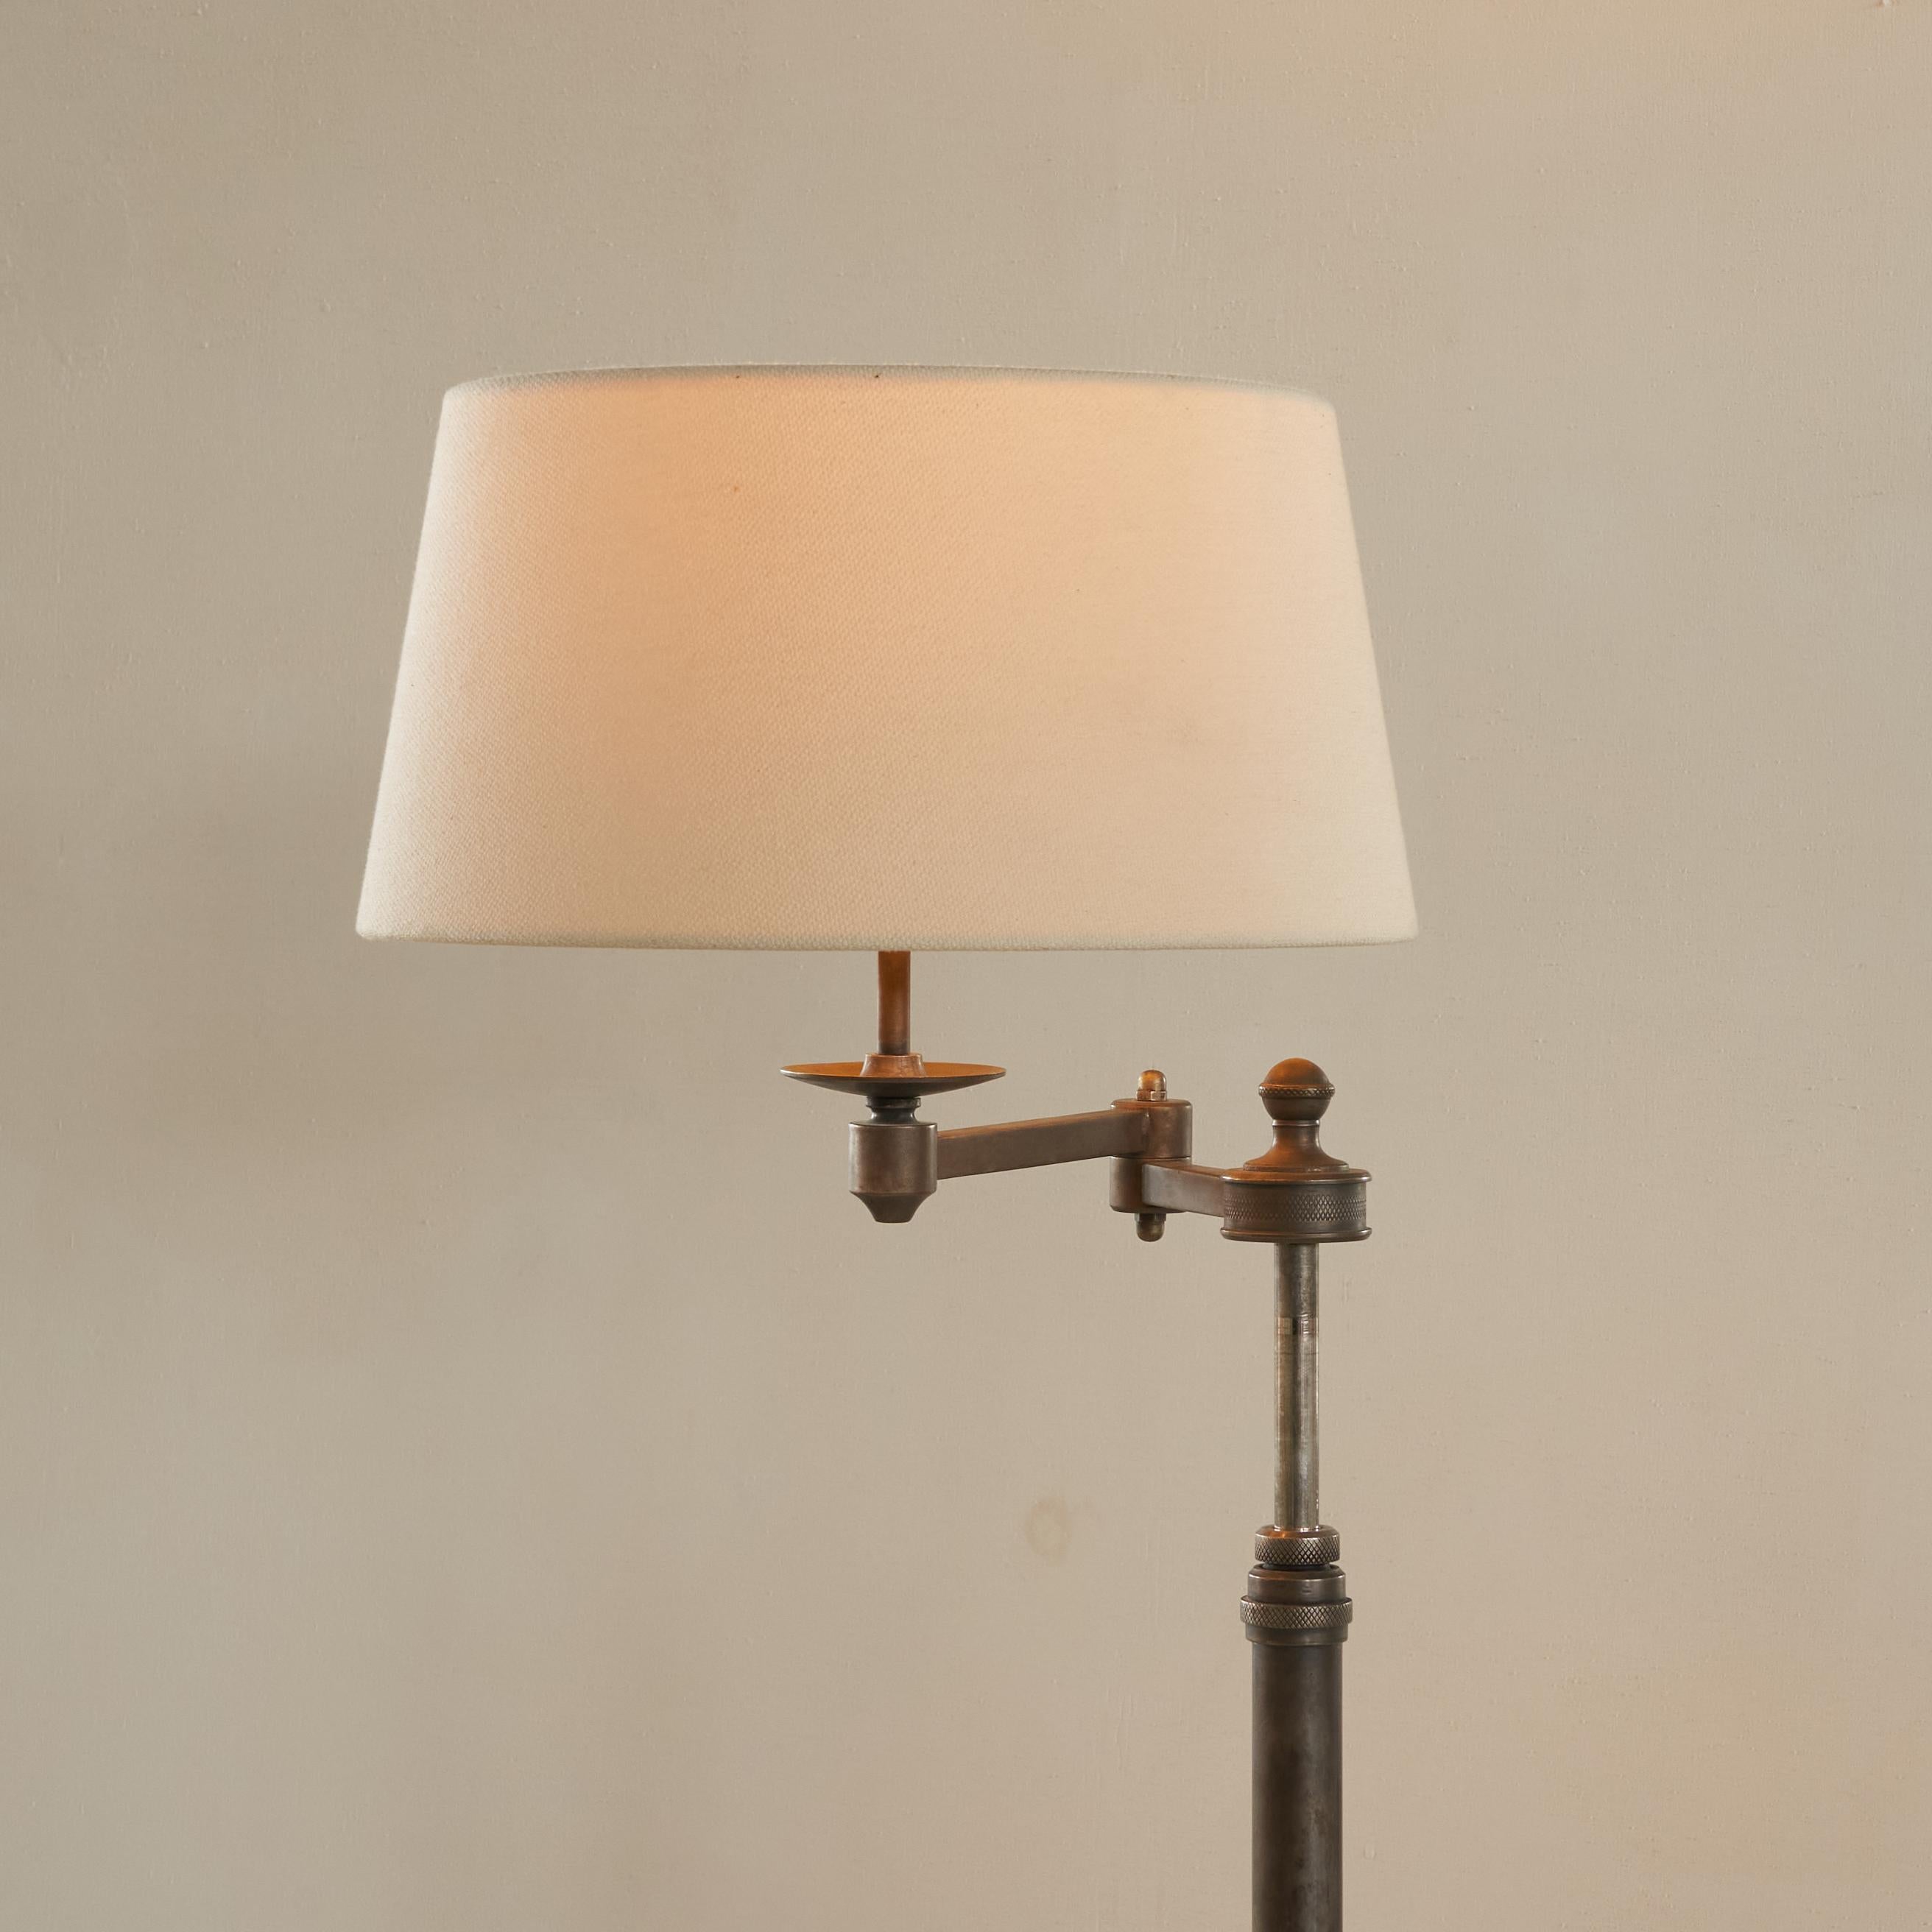 Italian Articulating Swivel Table Lamp in Metal 1970s For Sale 4